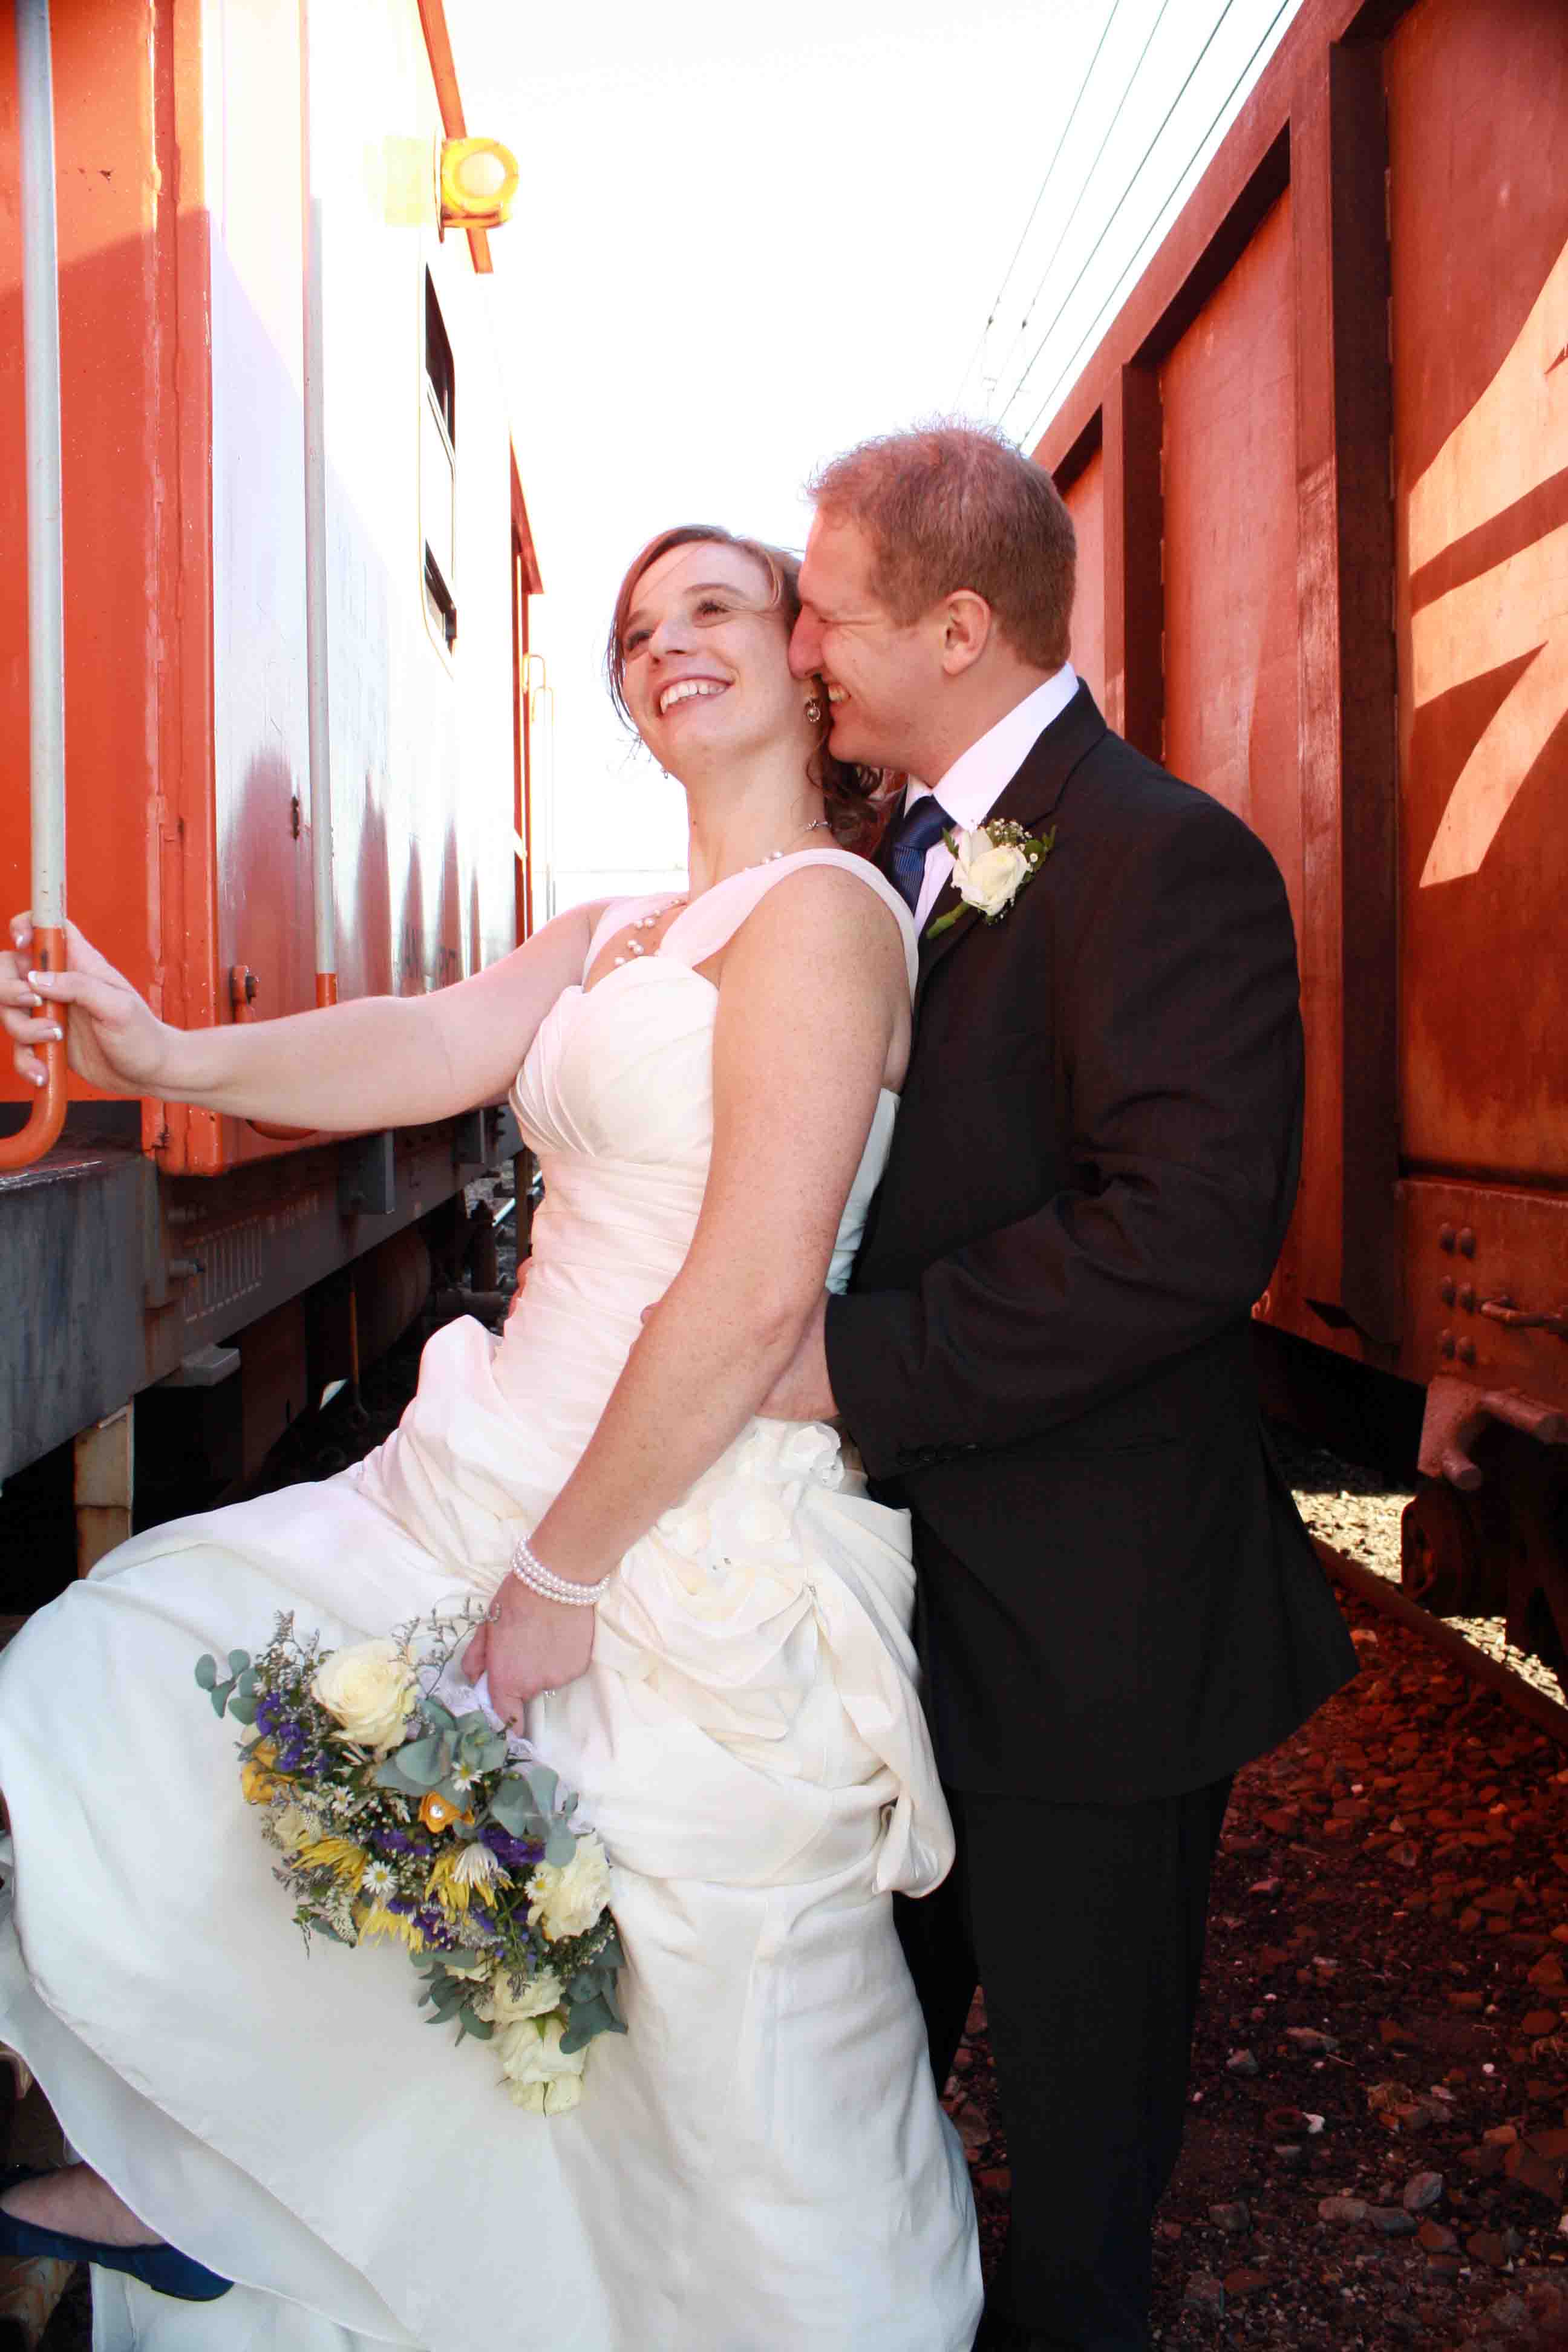 The Bride and Groom in between the trains